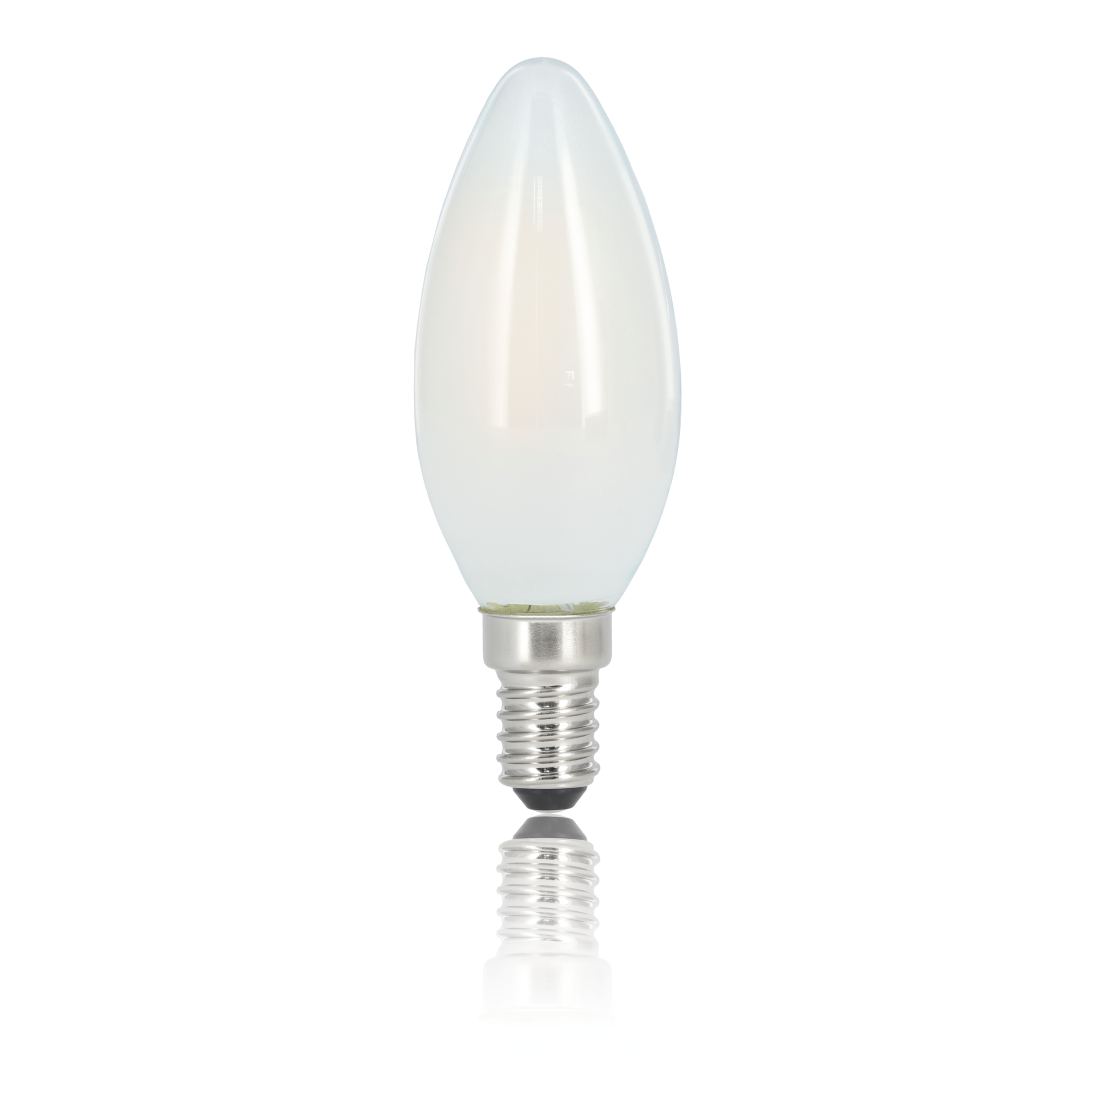 abx2 High-Res Image 2 - Xavax, LED Filament, E14, 470 lm Replaces 40 W, Candle, warm white, matt, RA90, Dimmable